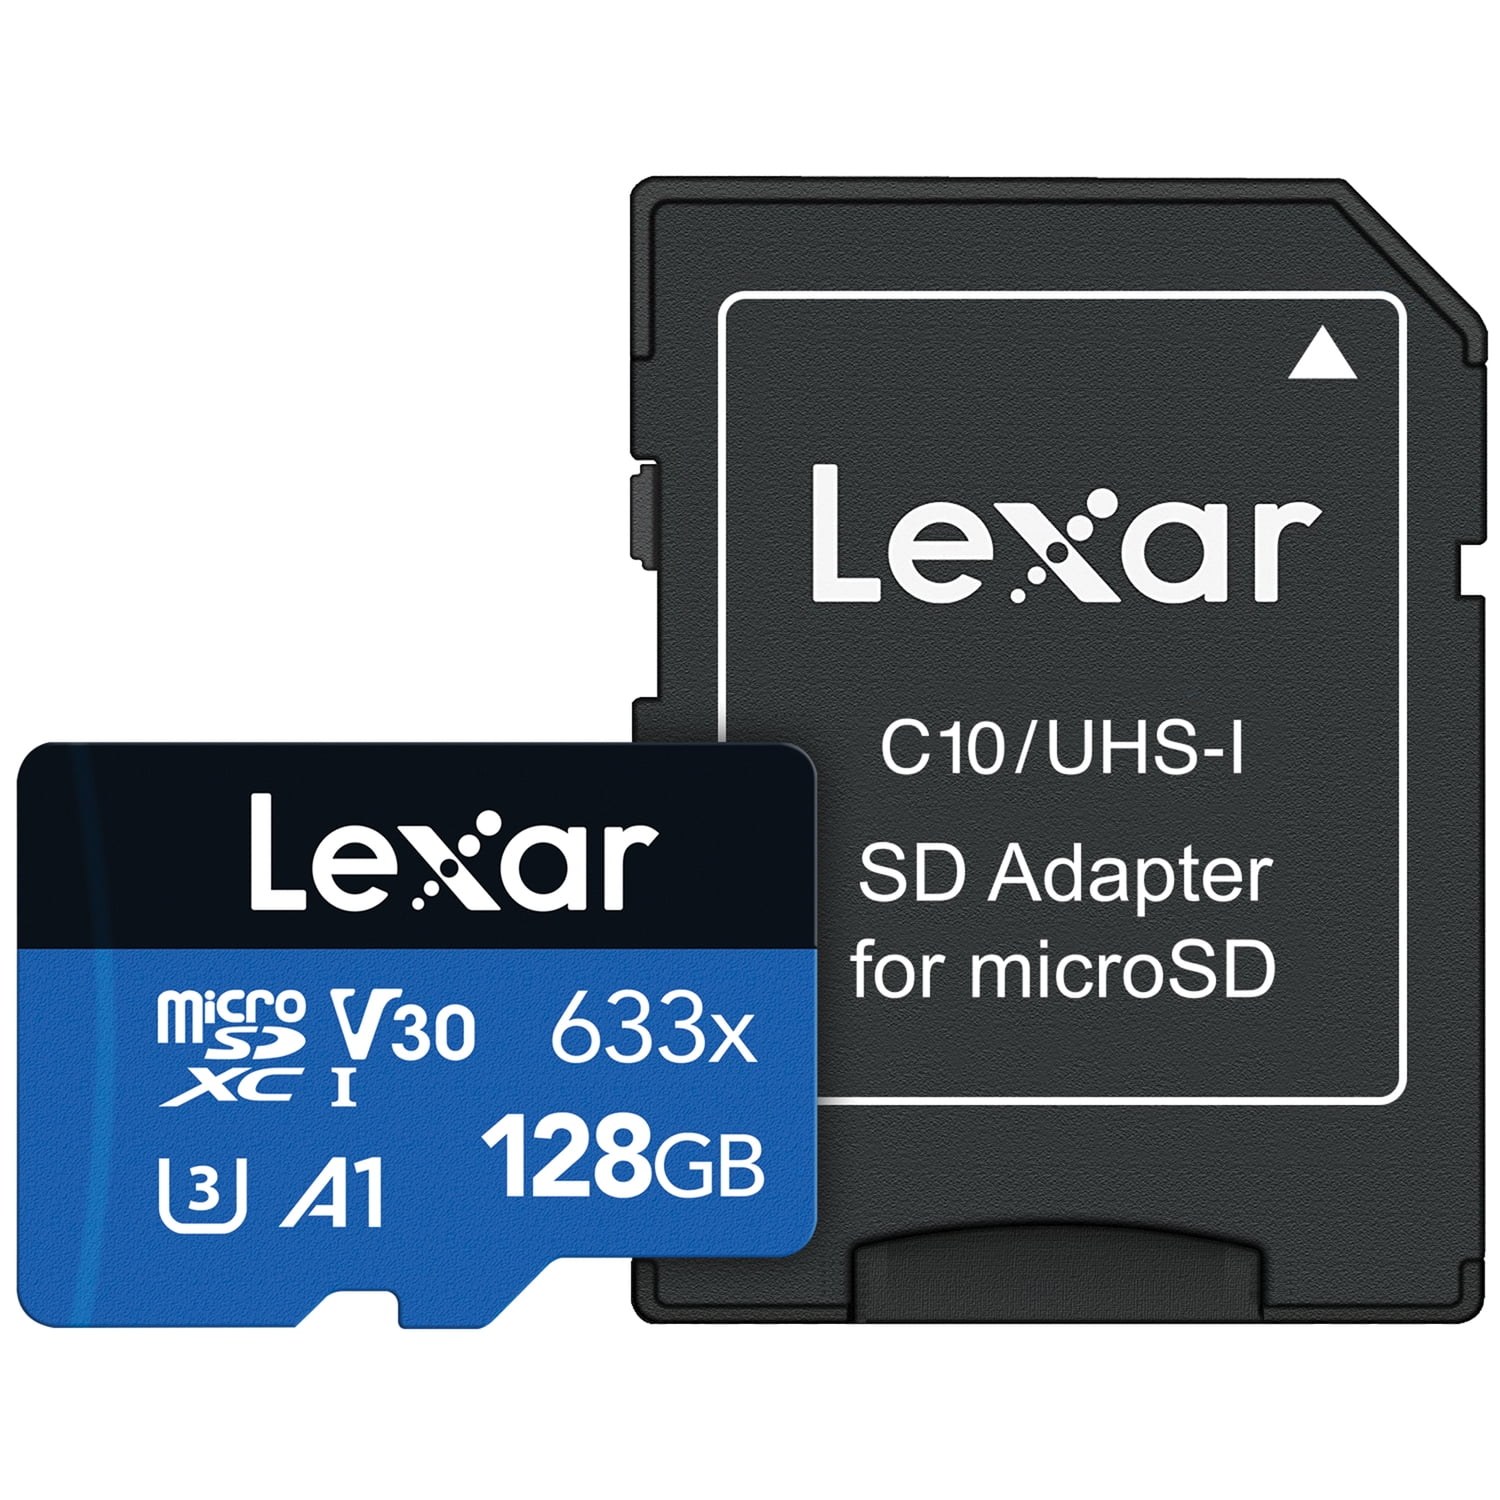 Picture of Lexar LSDMI128BBNL633A 128GB High-Performance 633x UHS-I microSDXC Memory Card with SD Adapter